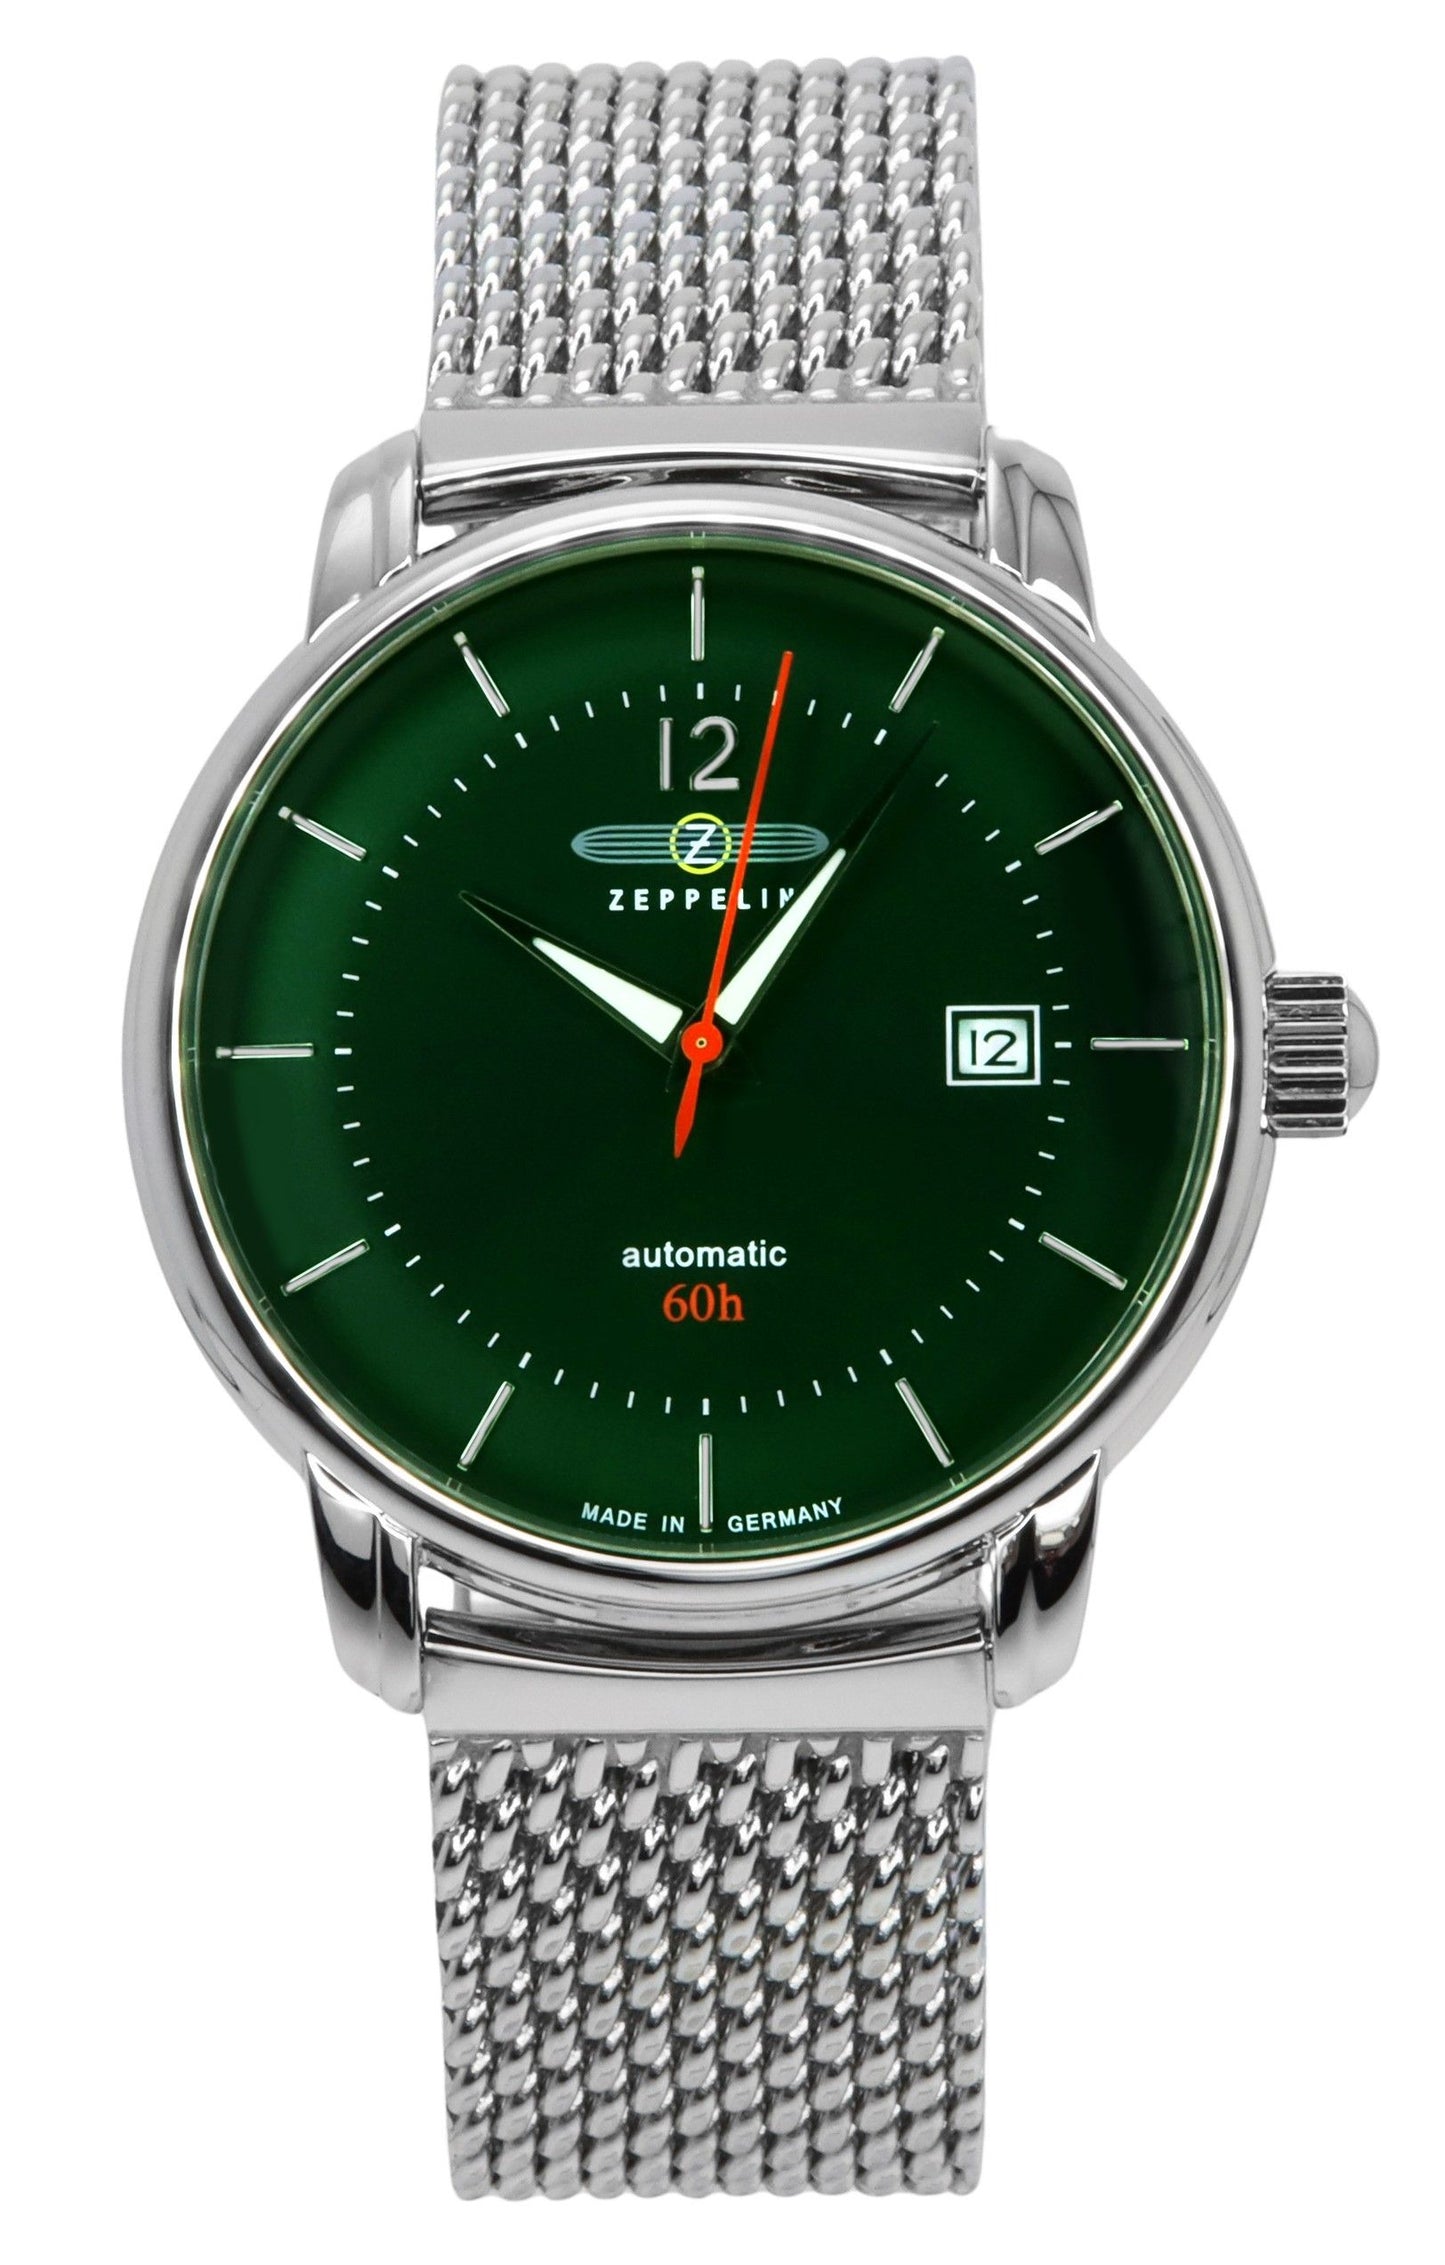 Zeppelin LZ120 Bodensee Stainless Steel Green Dial Automatic 8160M4 Men's Watch